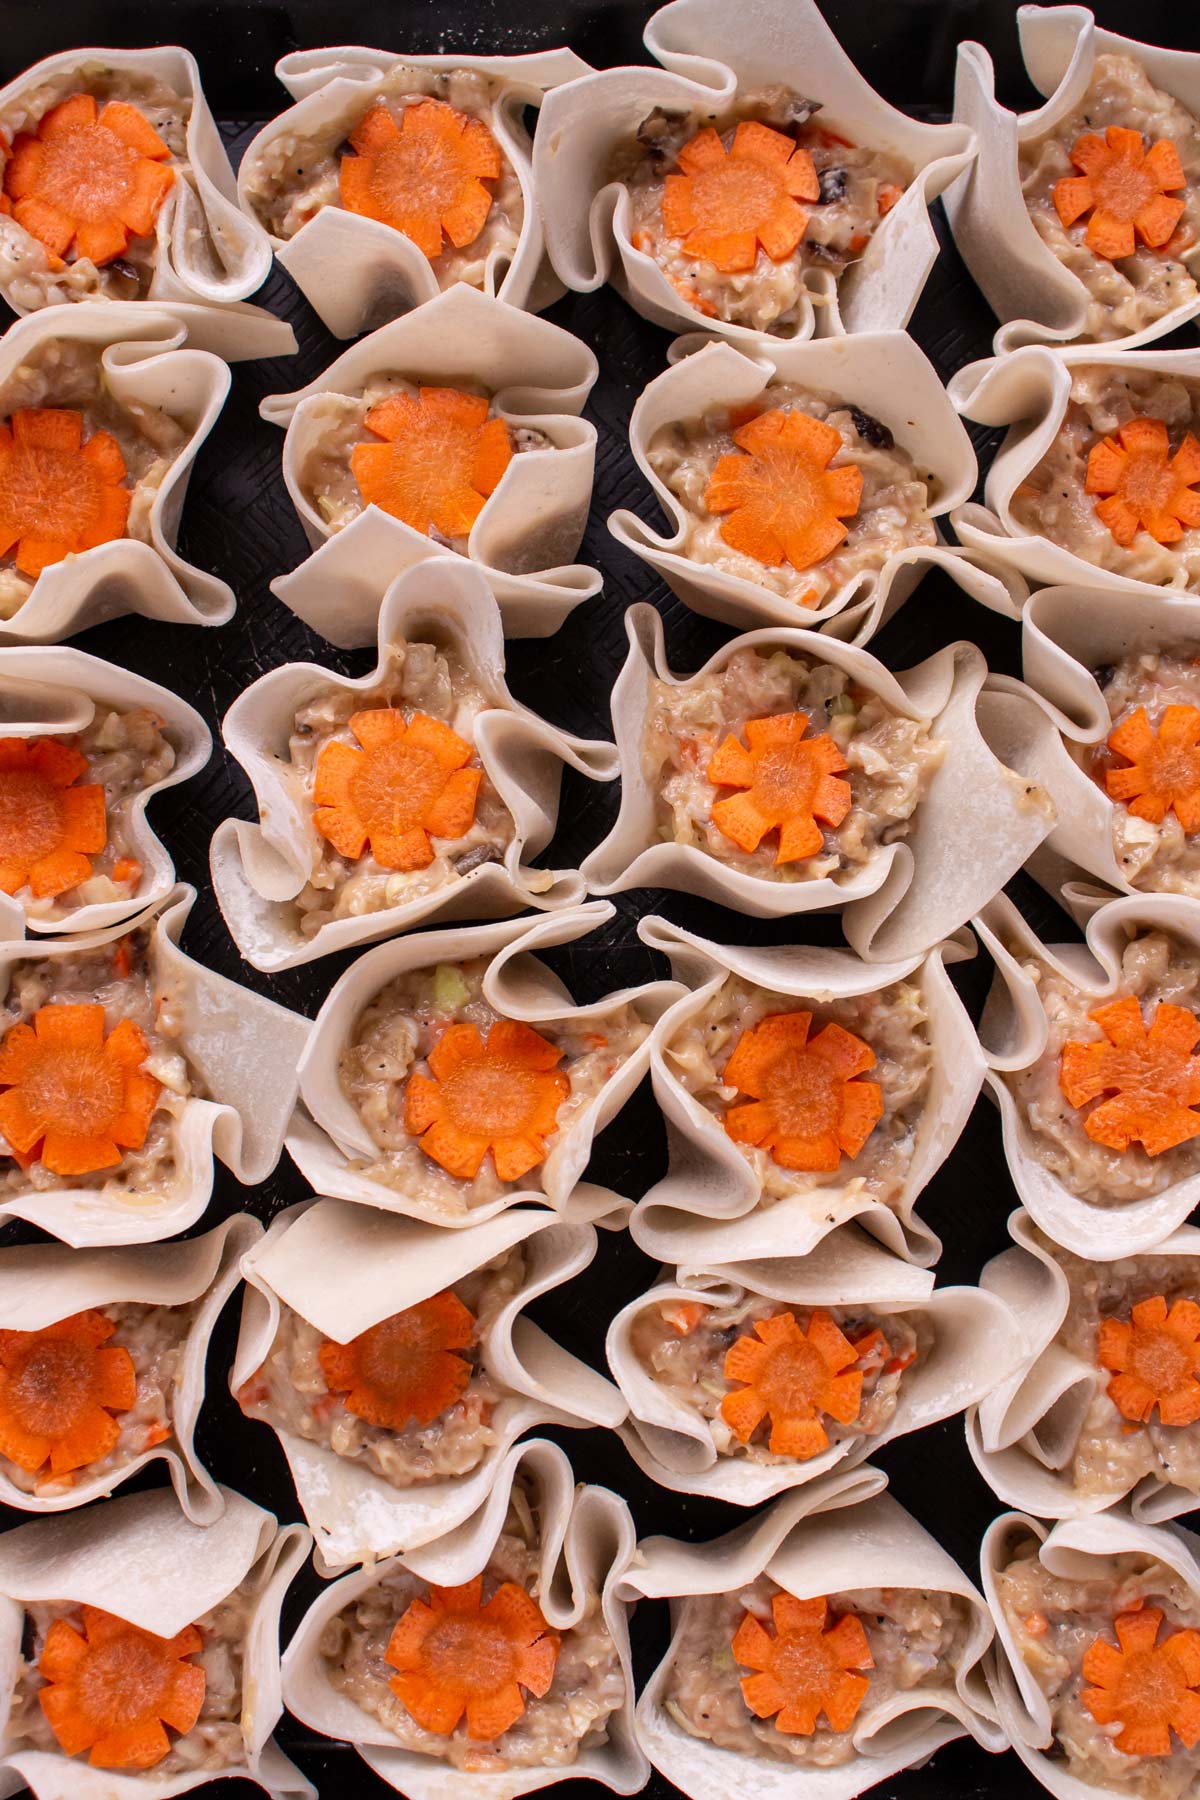 Rows of open-faced chicken siu mai dumplings garnished with decoratively cut carrots.